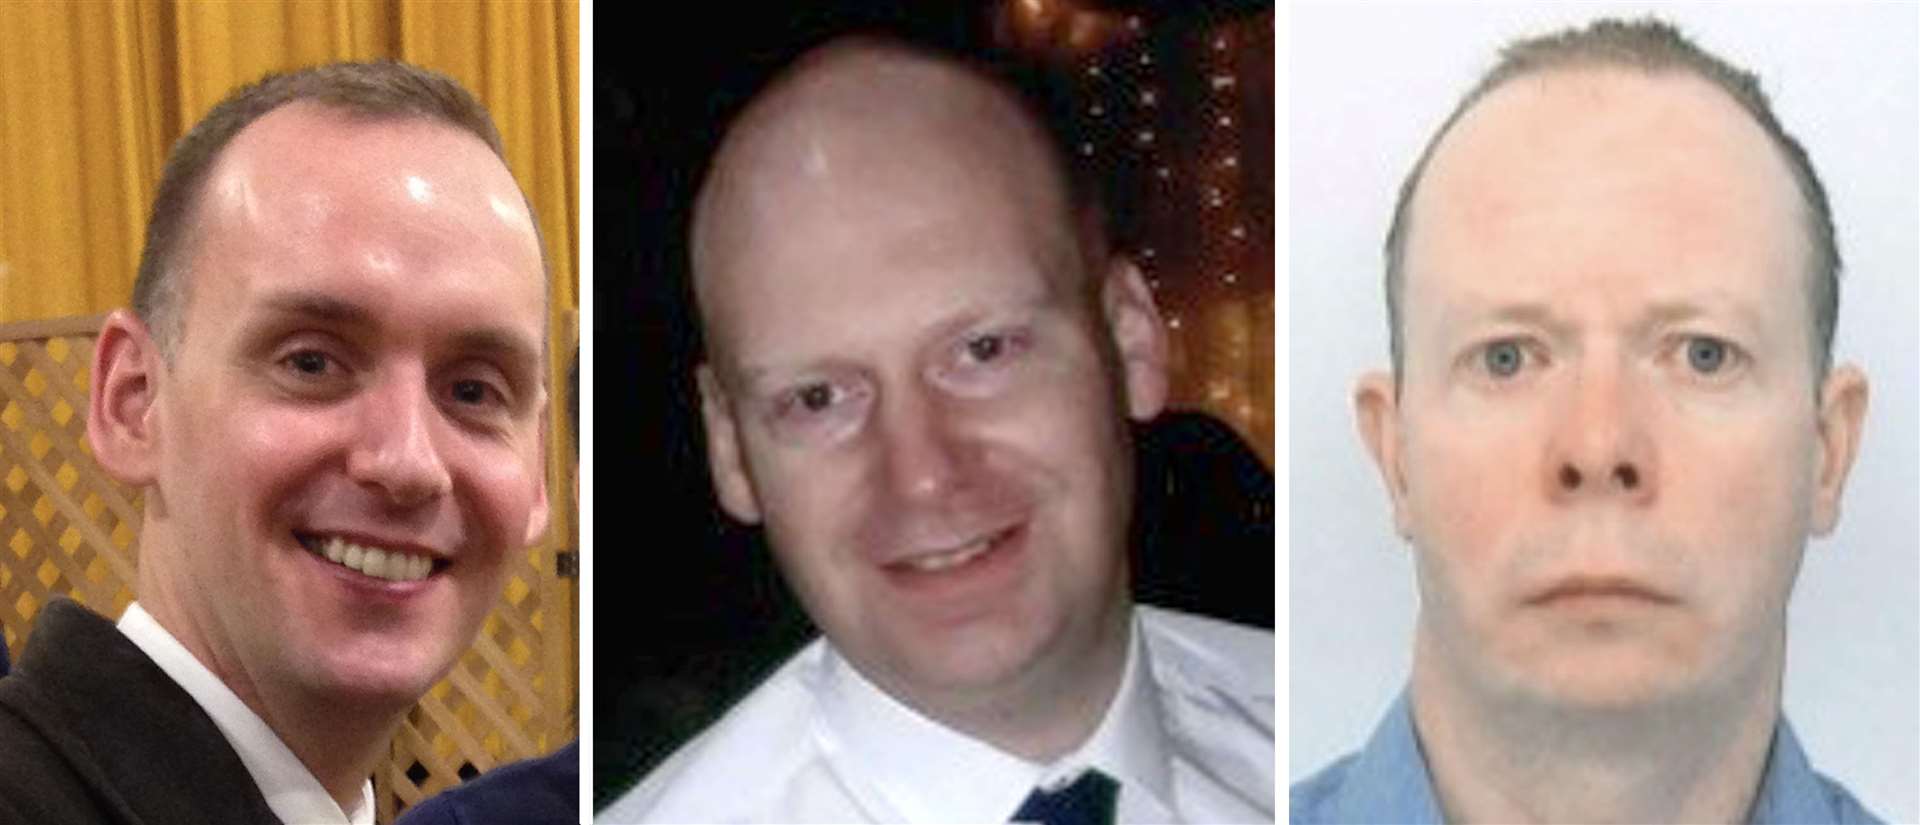 Joe Ritchie-Bennett, James Furlong and David Wails were killed in the Reading terror attack (Family handout/PA)